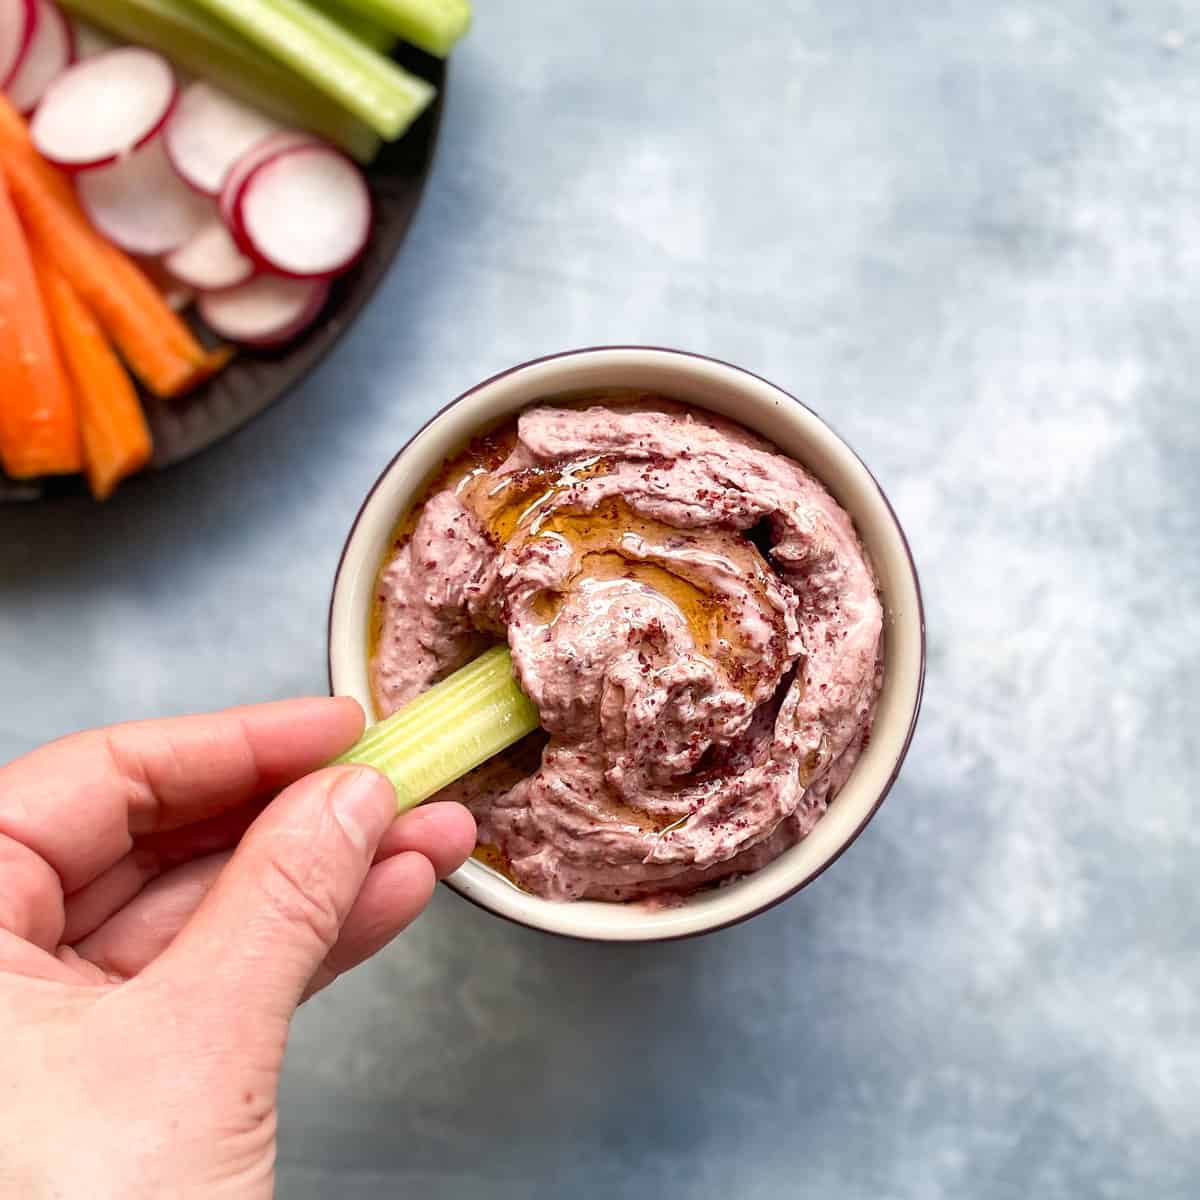 hand holding celery dipping into small bowl of pinkish dip drizzled with olive oil and sumac next to plate of vegetables.